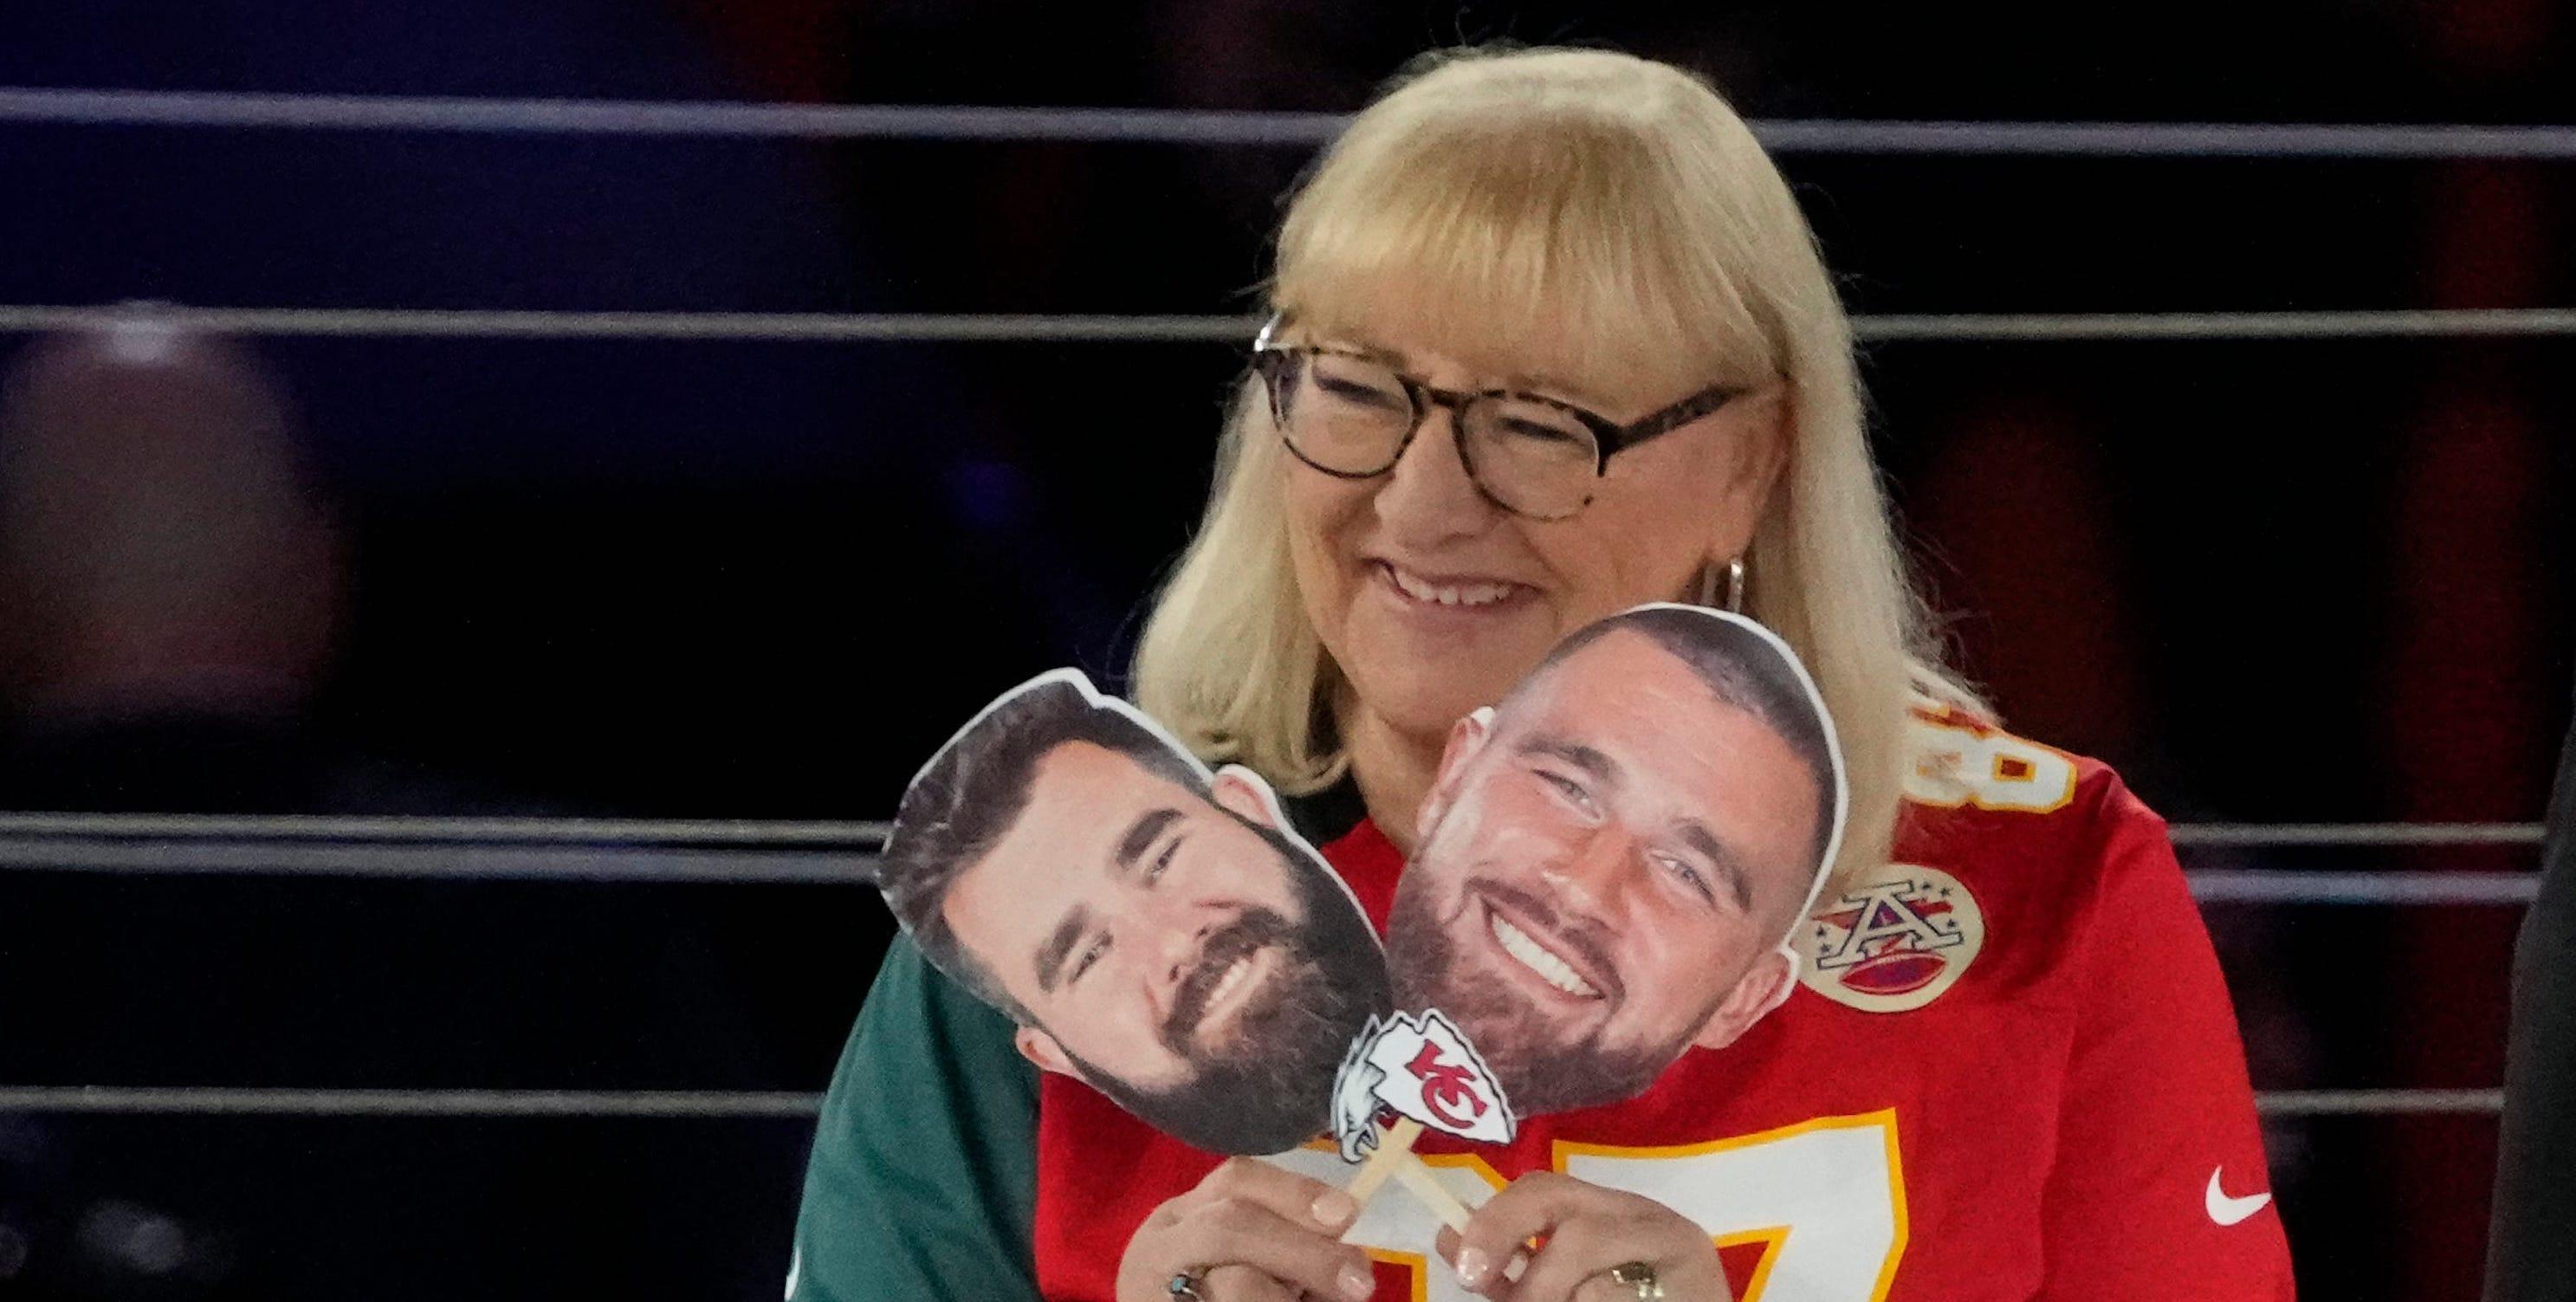 Donna Kelce answers questions about her sons, Philadelphia Eagles center Jason Kelce, left, and Kansas City Chiefs tight end Travis Kelce, during Super Bowl Opening Night on Feb. 6, 2023.